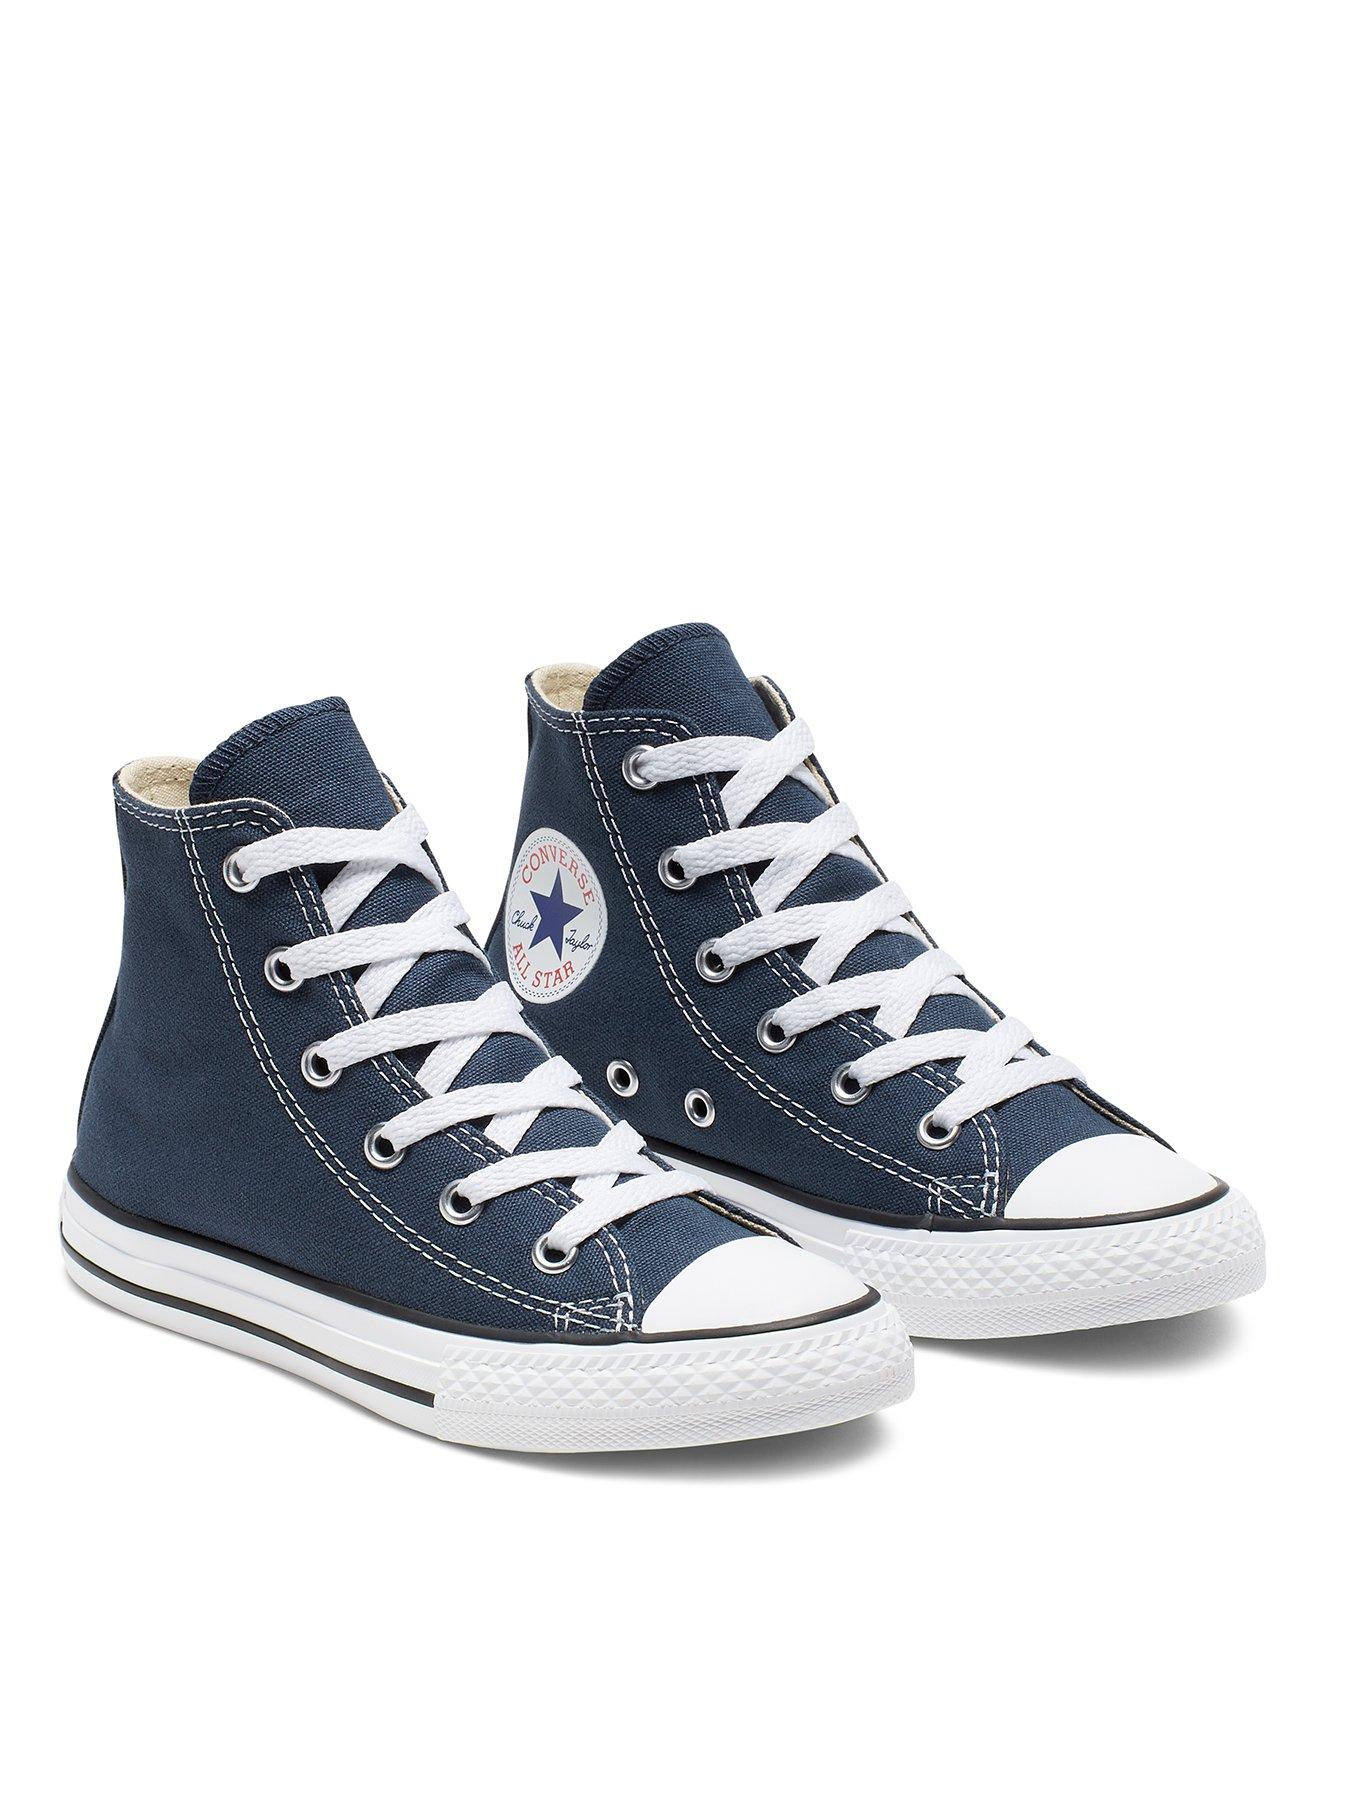  Chuck Taylor All Star Ox Childrens Unisex Trainers -Navy